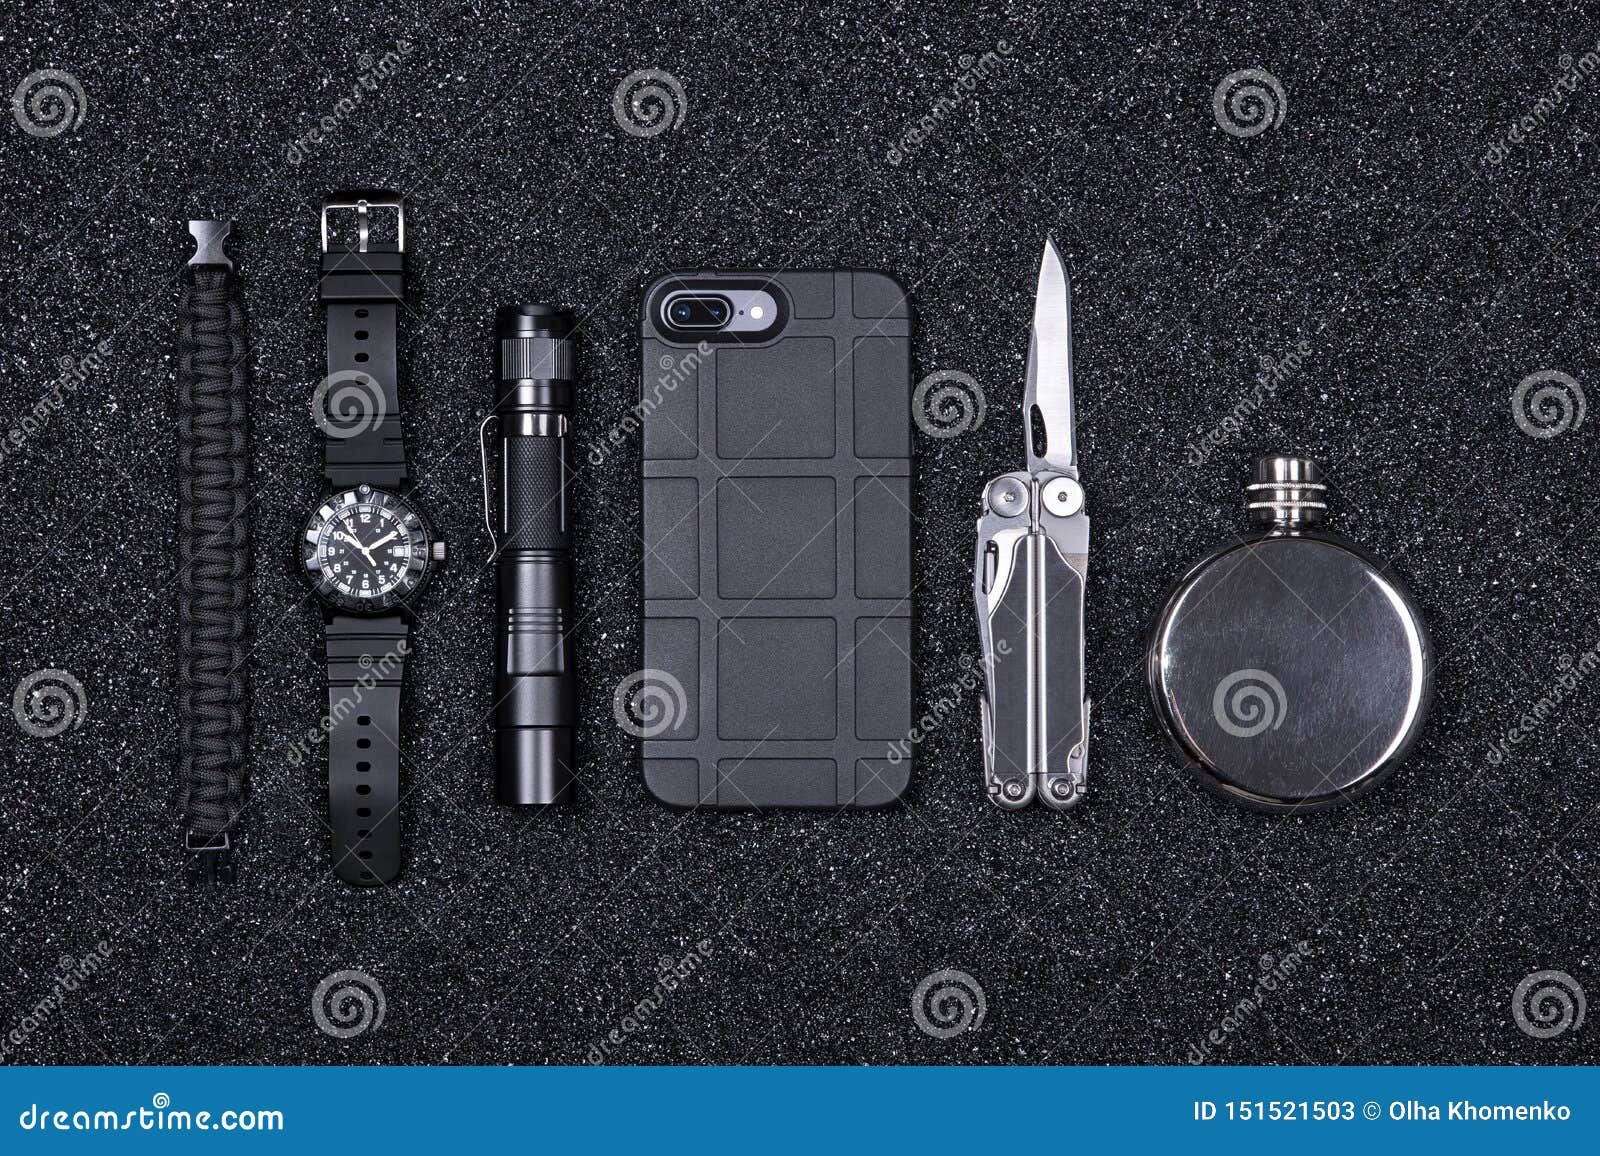 everyday carry edc military items for men- multi tool, lighter, phone, tactical watch, survival bracelet,flashlight and flask.